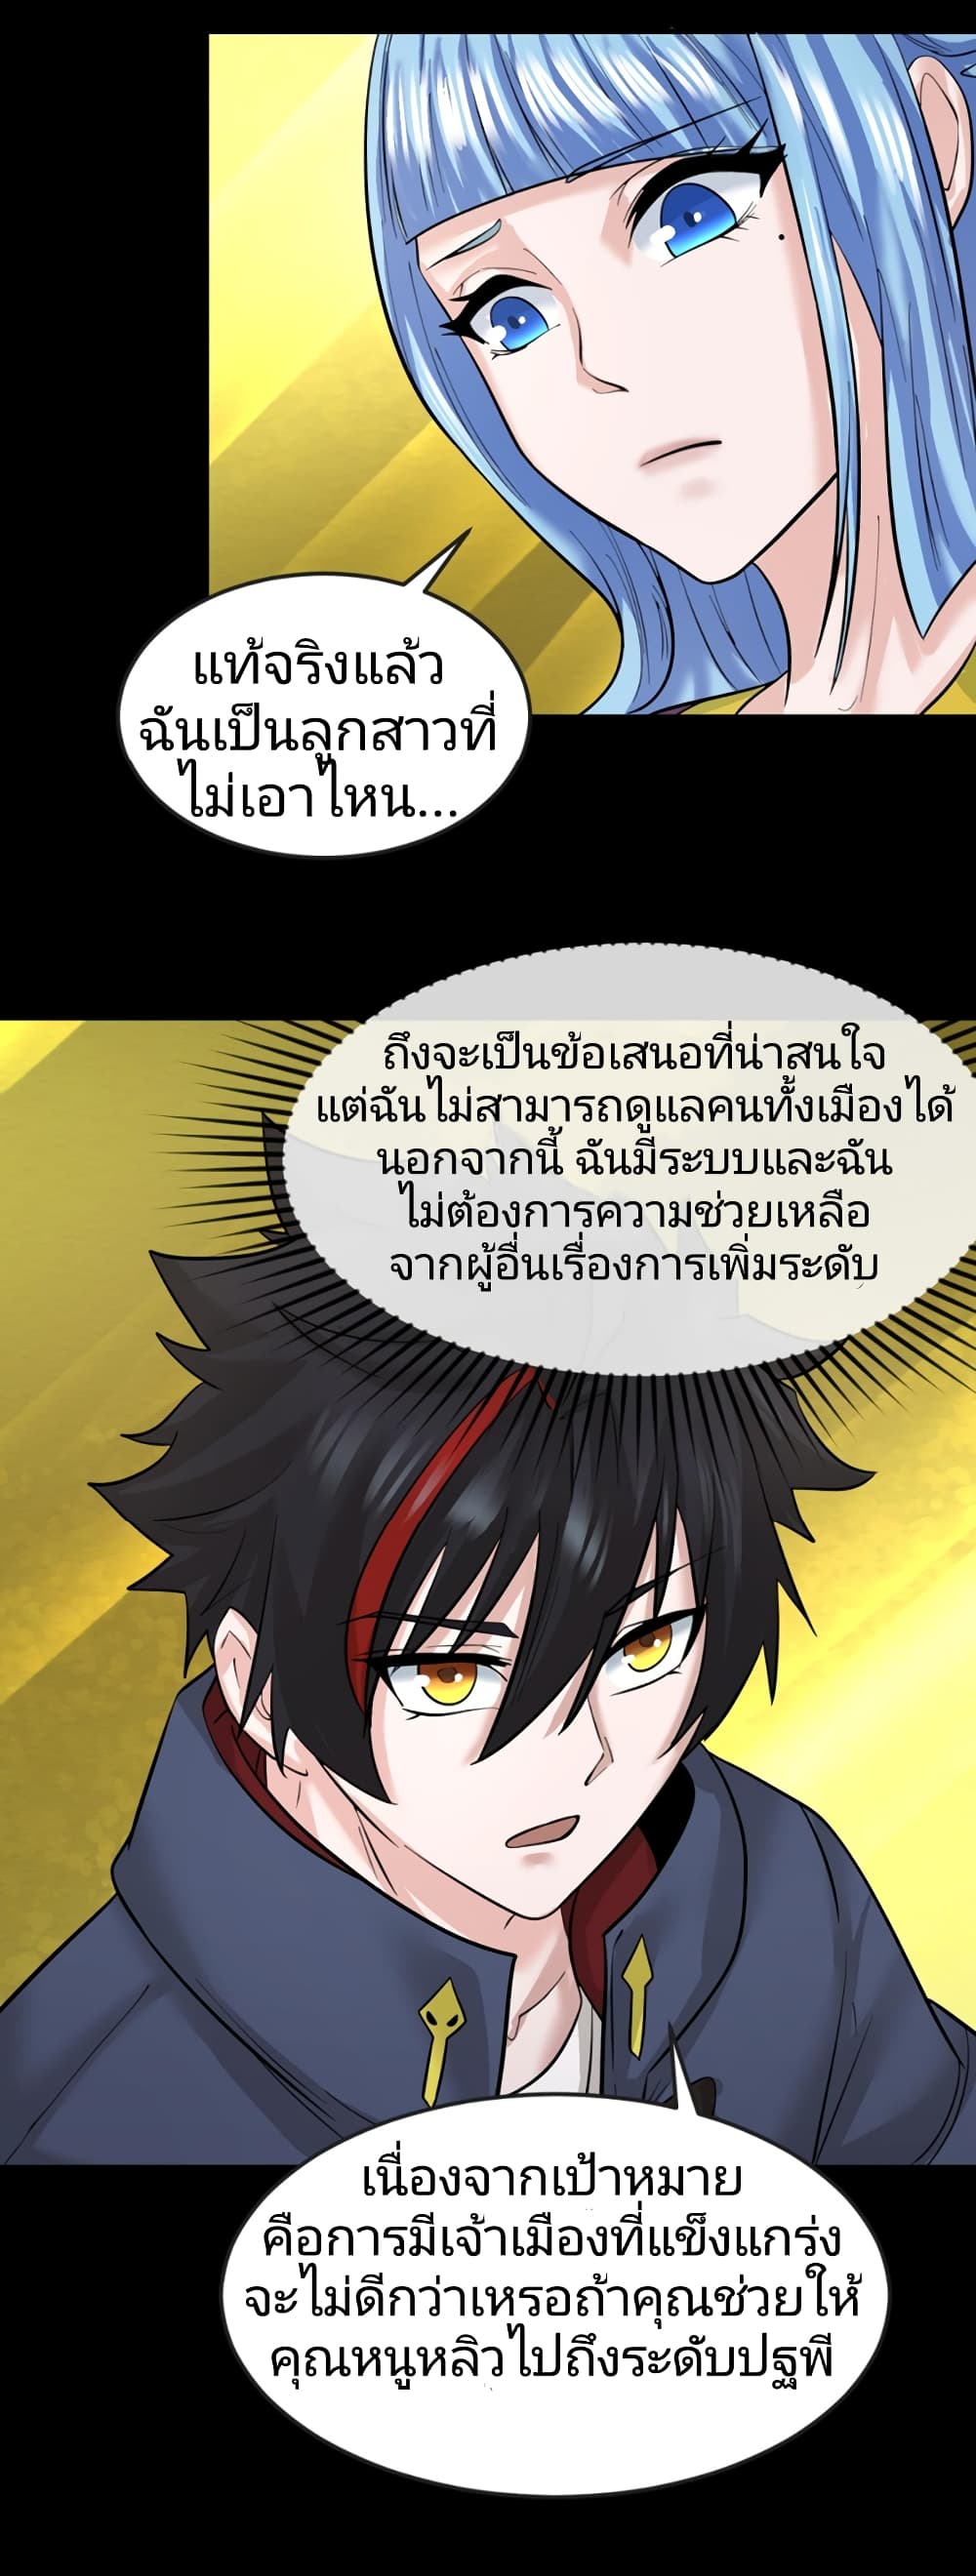 The Age of Ghost Spirits à¸à¸­à¸à¸à¸µà¹ 40 (24)